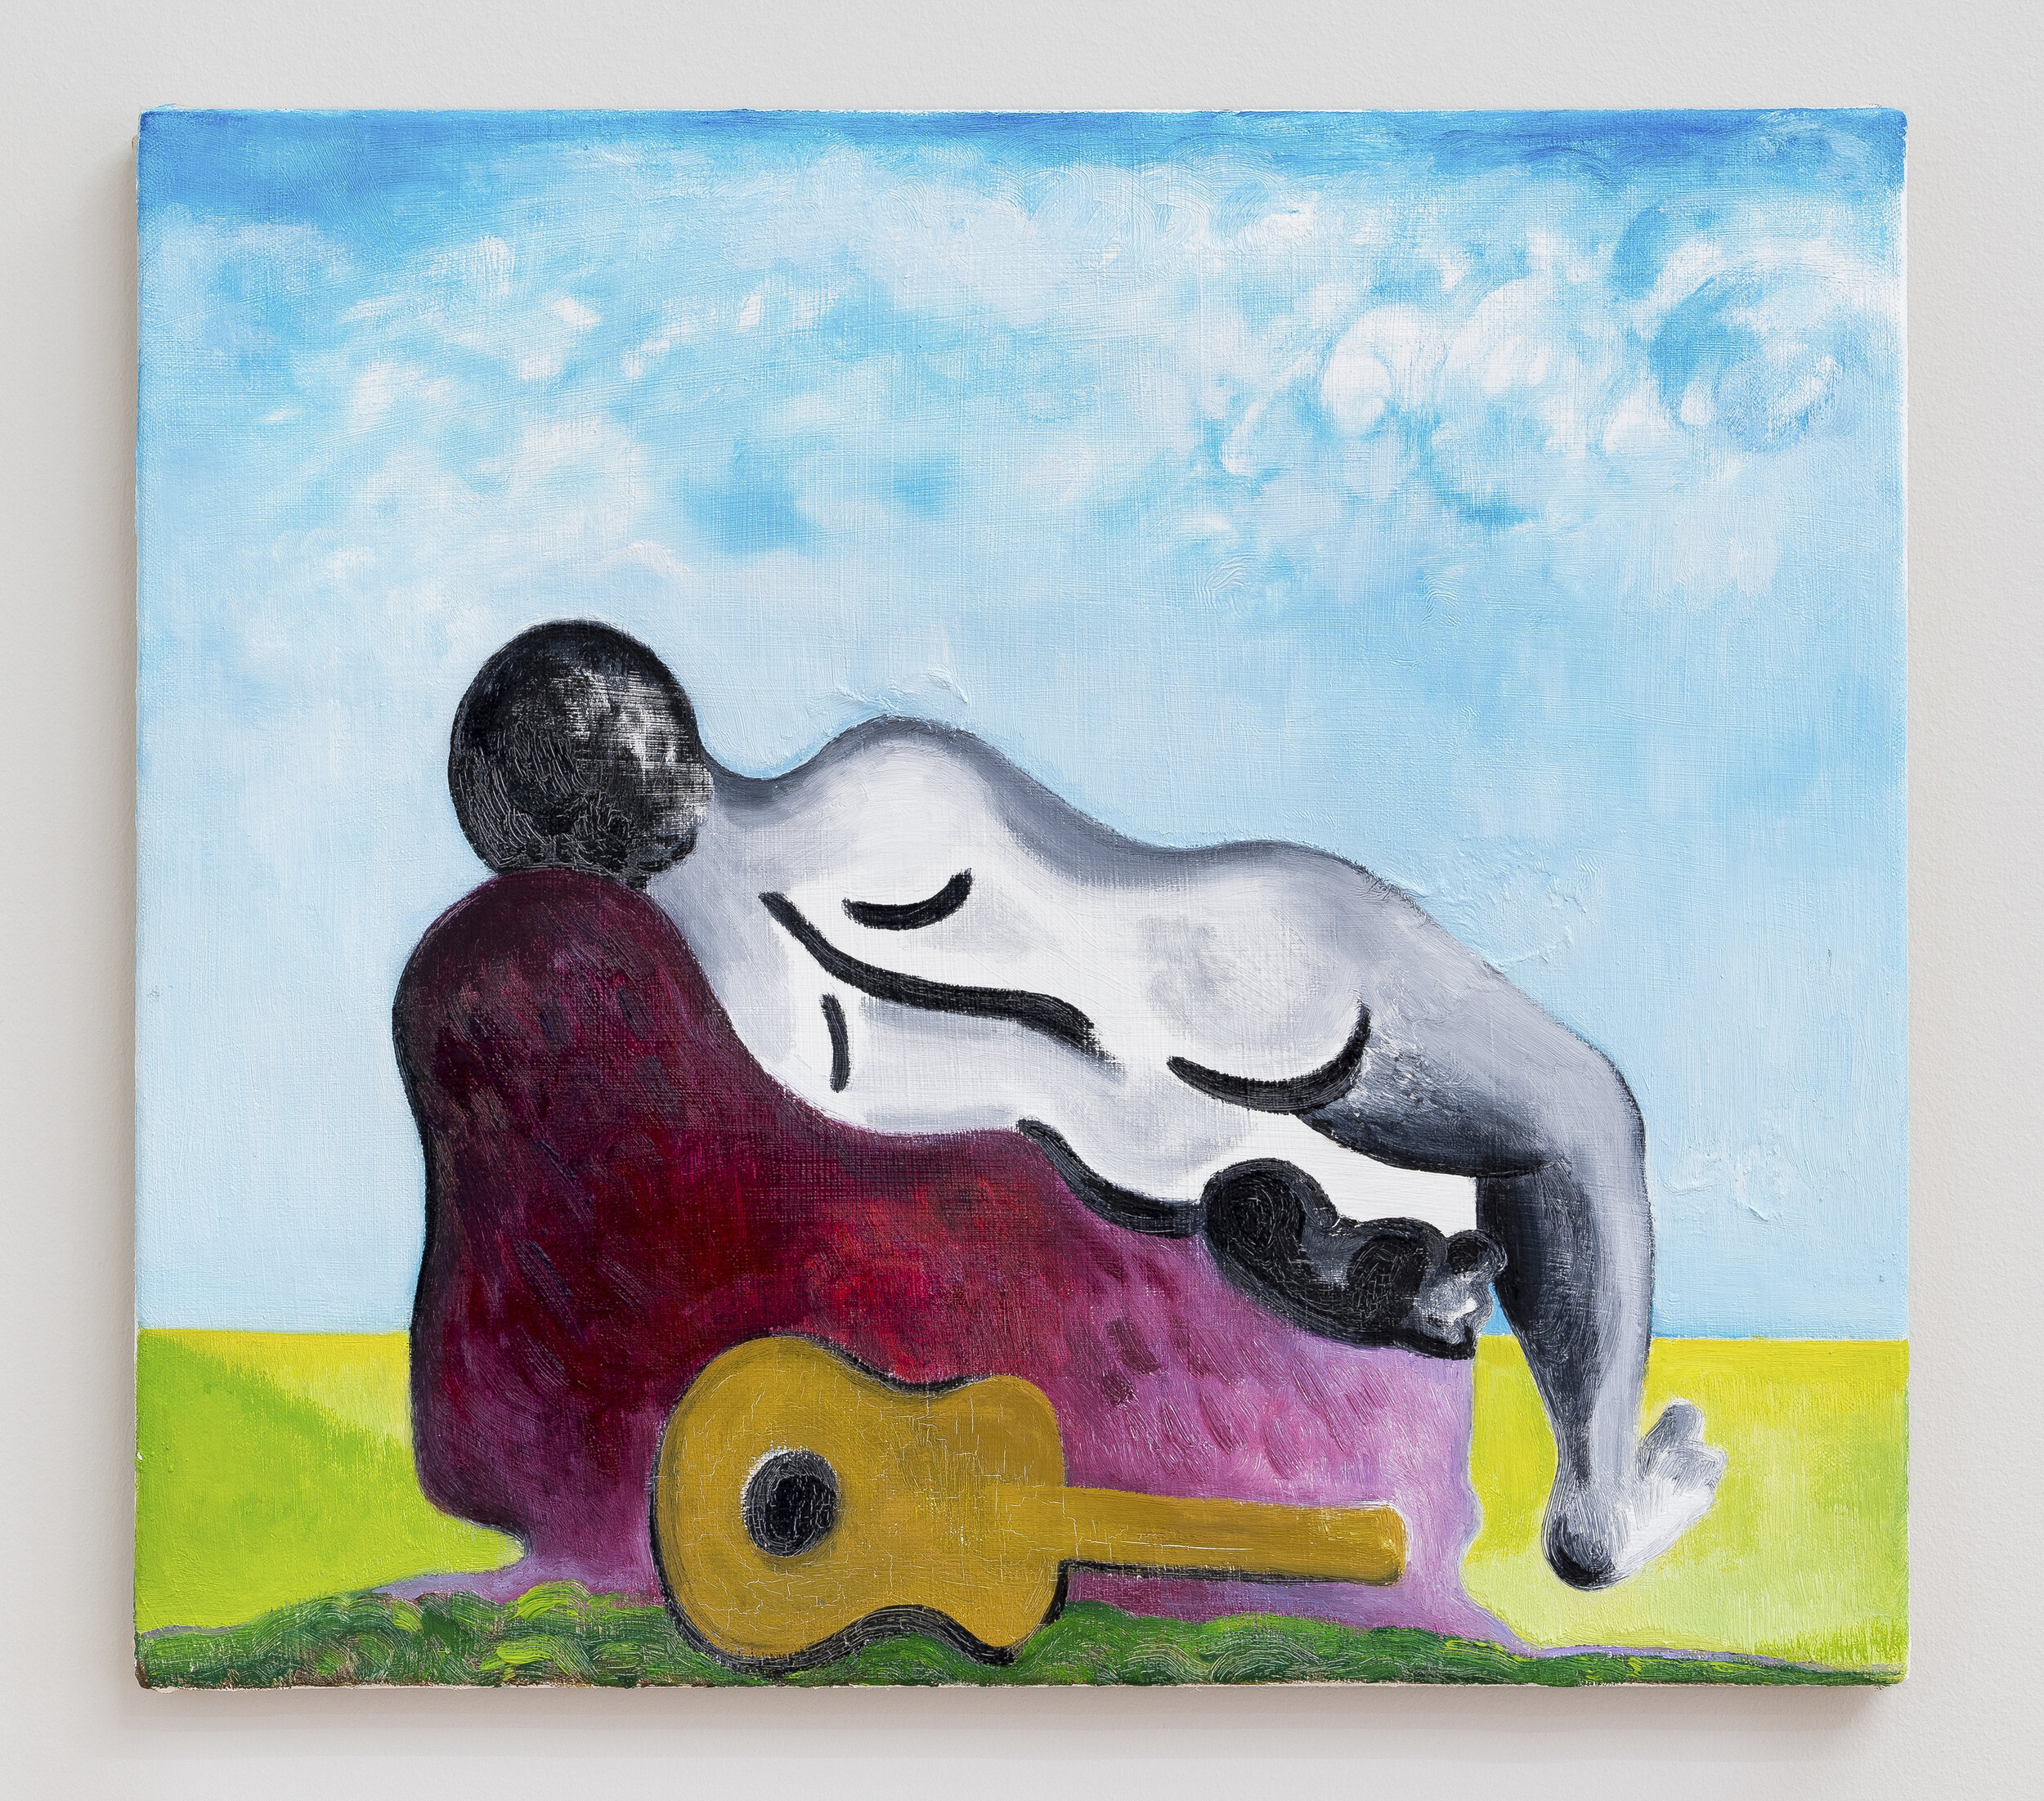 ProjetPangee_AndreEthier_SleeperGuitar_OilOnCanvas_16x18inches_2020_3000px.jpg